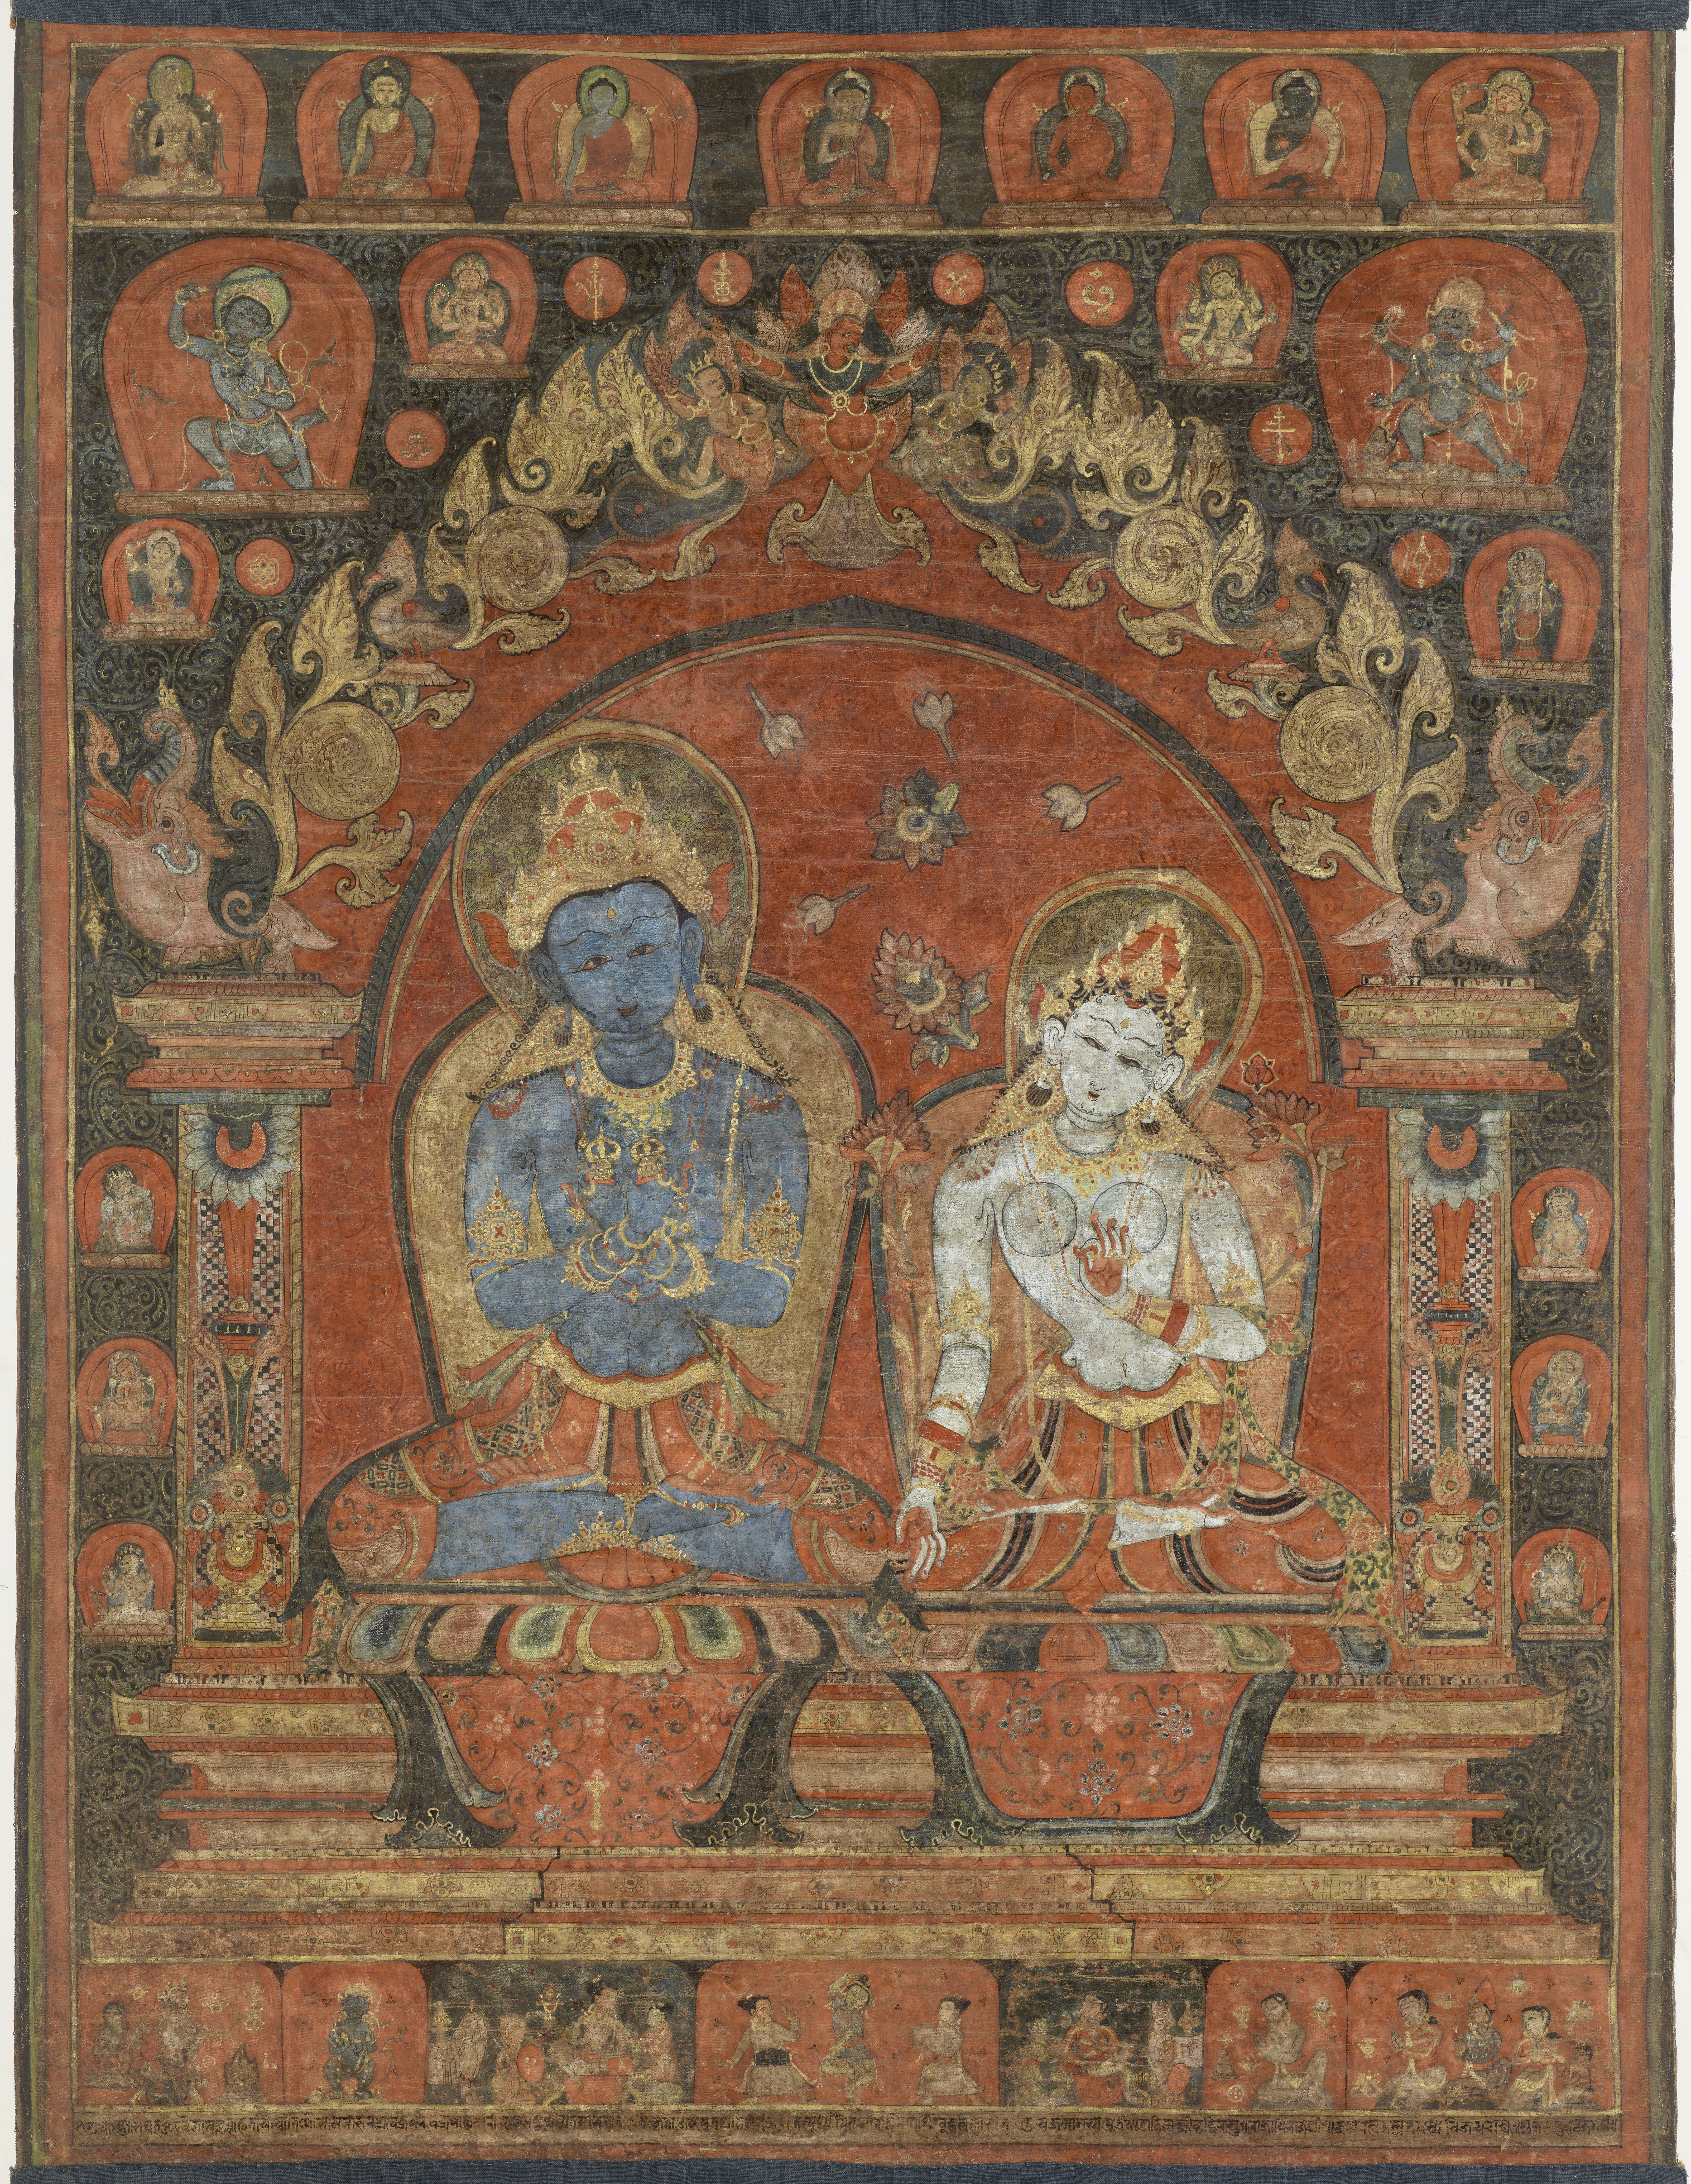 Buddha and female companion seated on double lotus throne, surrounded by deities in red nimbuses